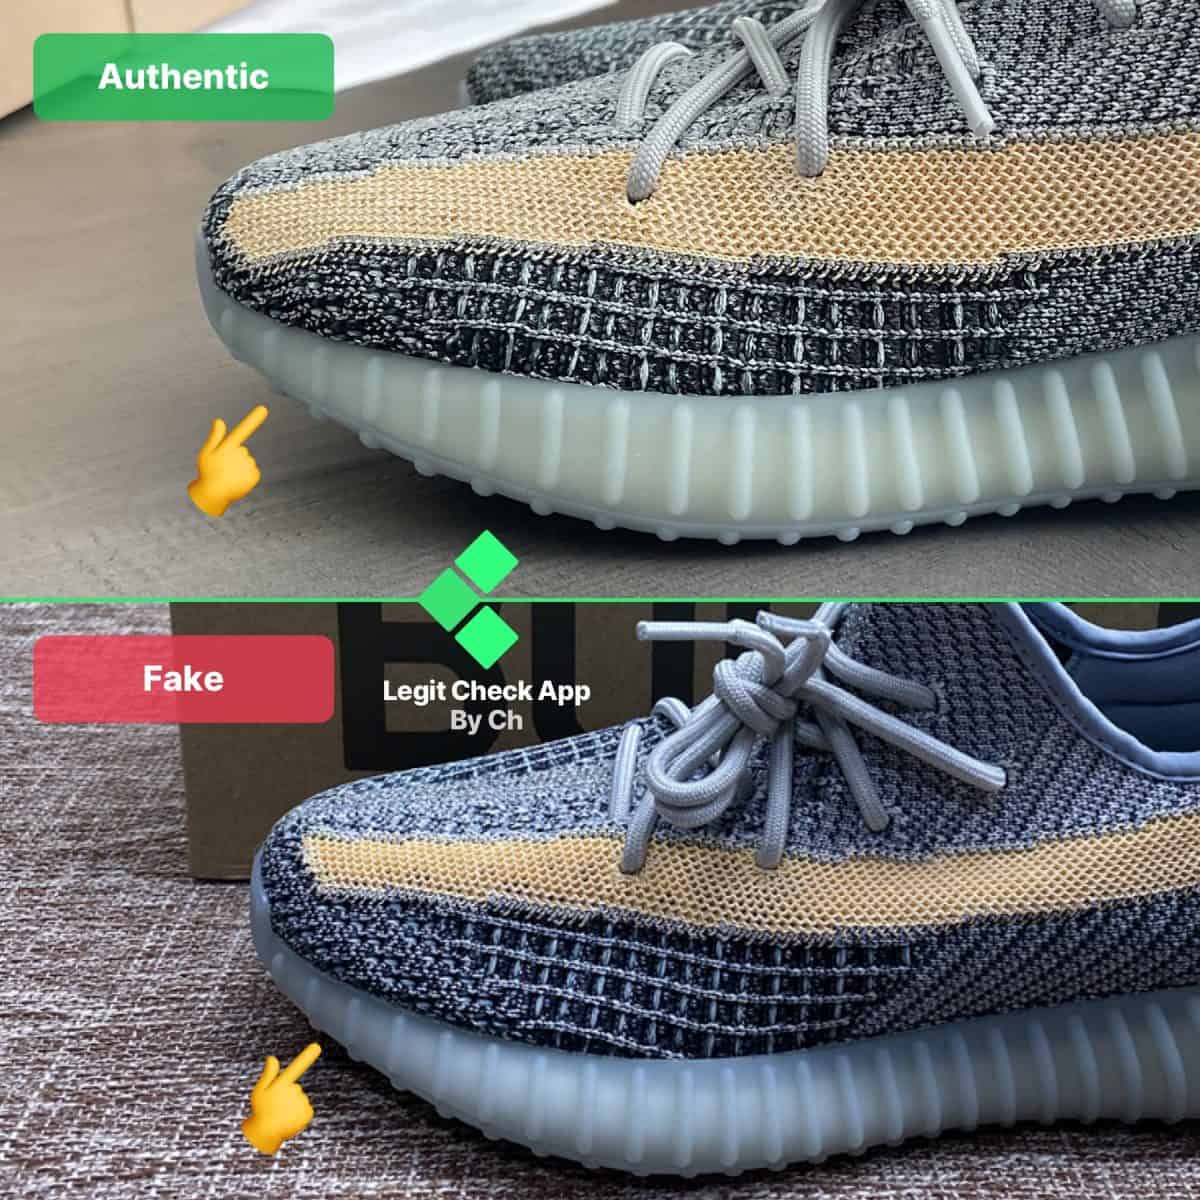 yeezy 350 v2 ash blue authenitcation guide